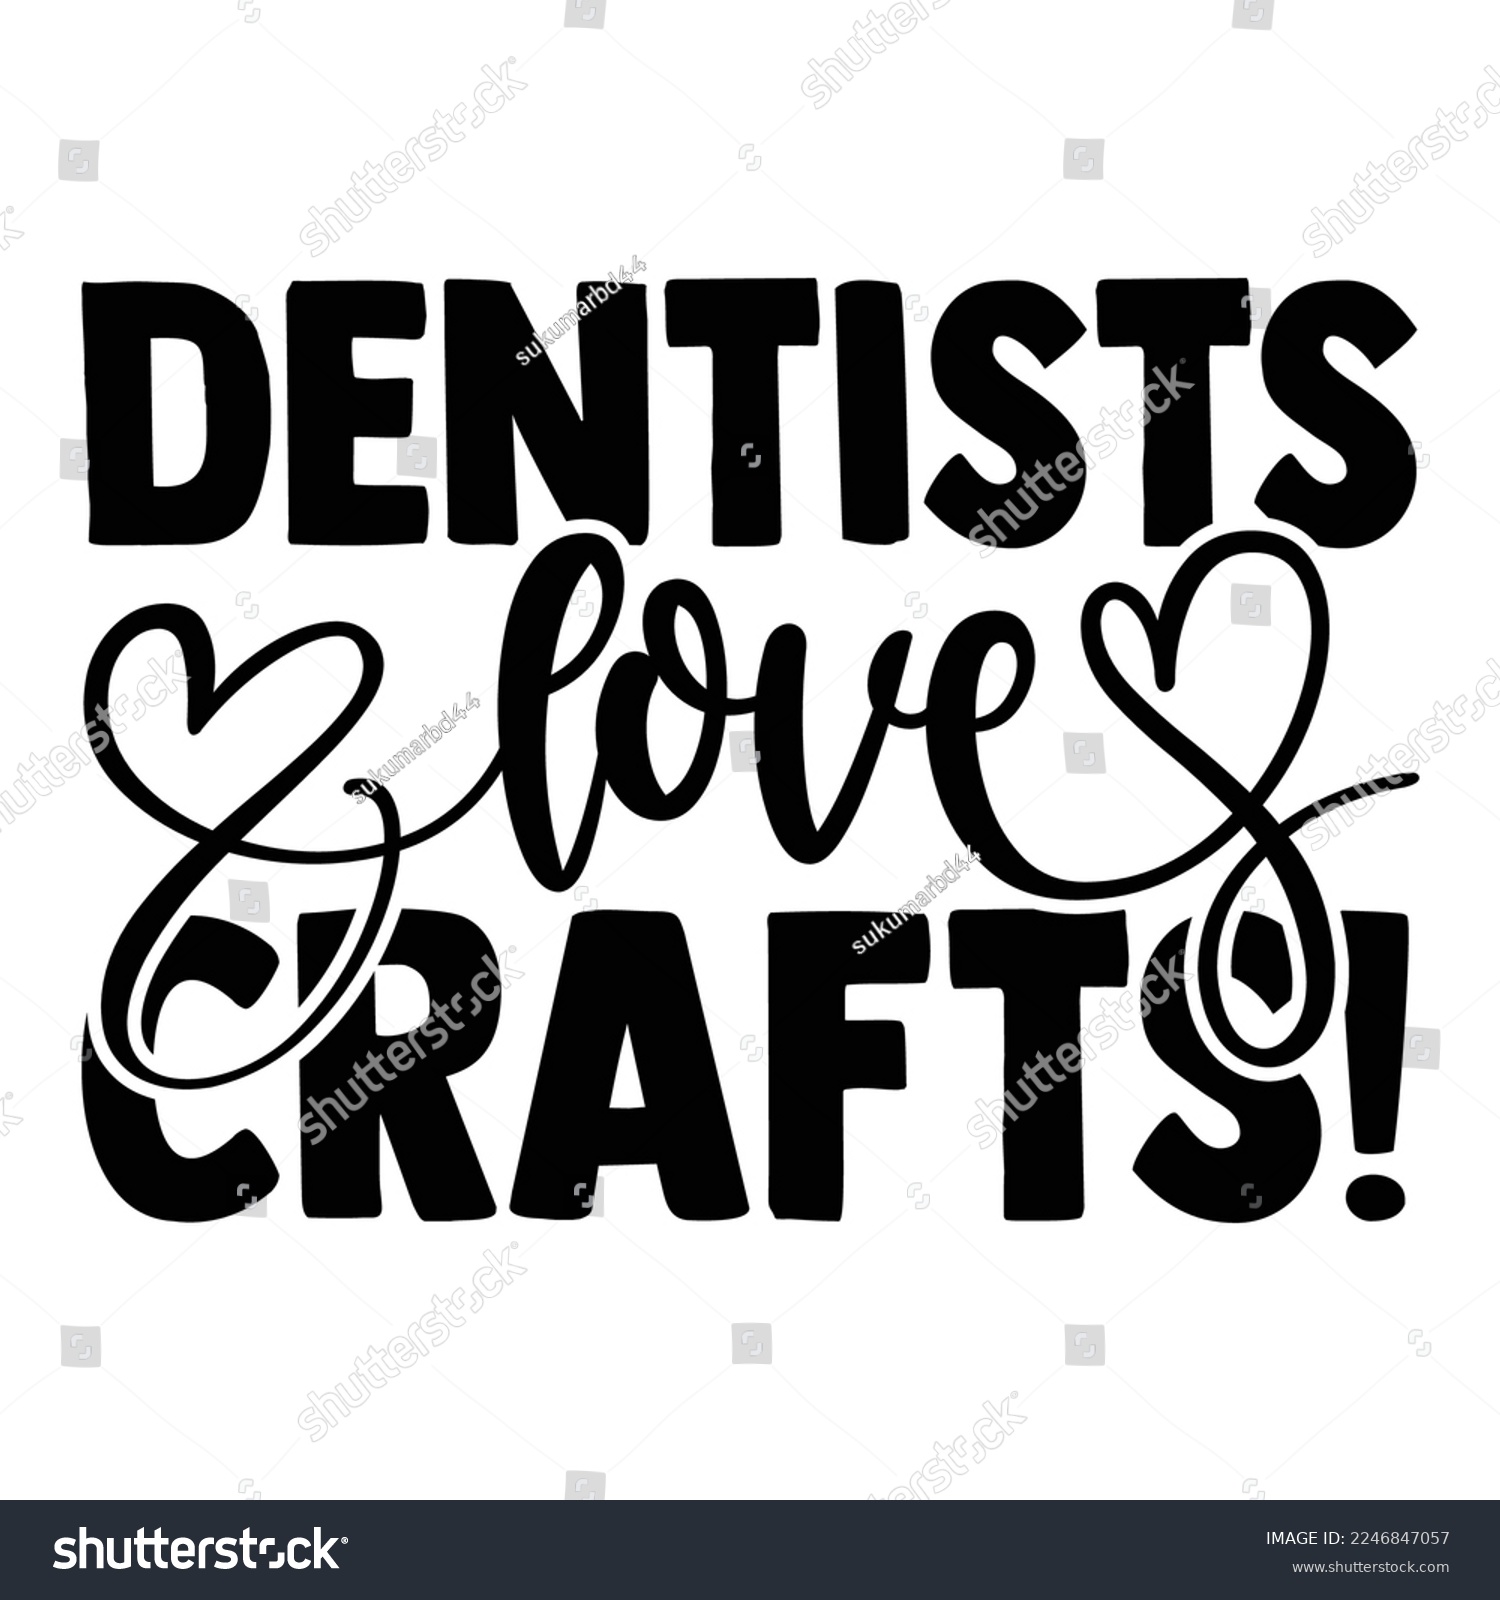 SVG of Dentists Love Crafts! - Dentist T-shirt Design, Conceptual handwritten phrase svg calligraphic, Hand drawn lettering phrase isolated on white background, for Cutting Machine, Silhouette Cameo, Cricut svg